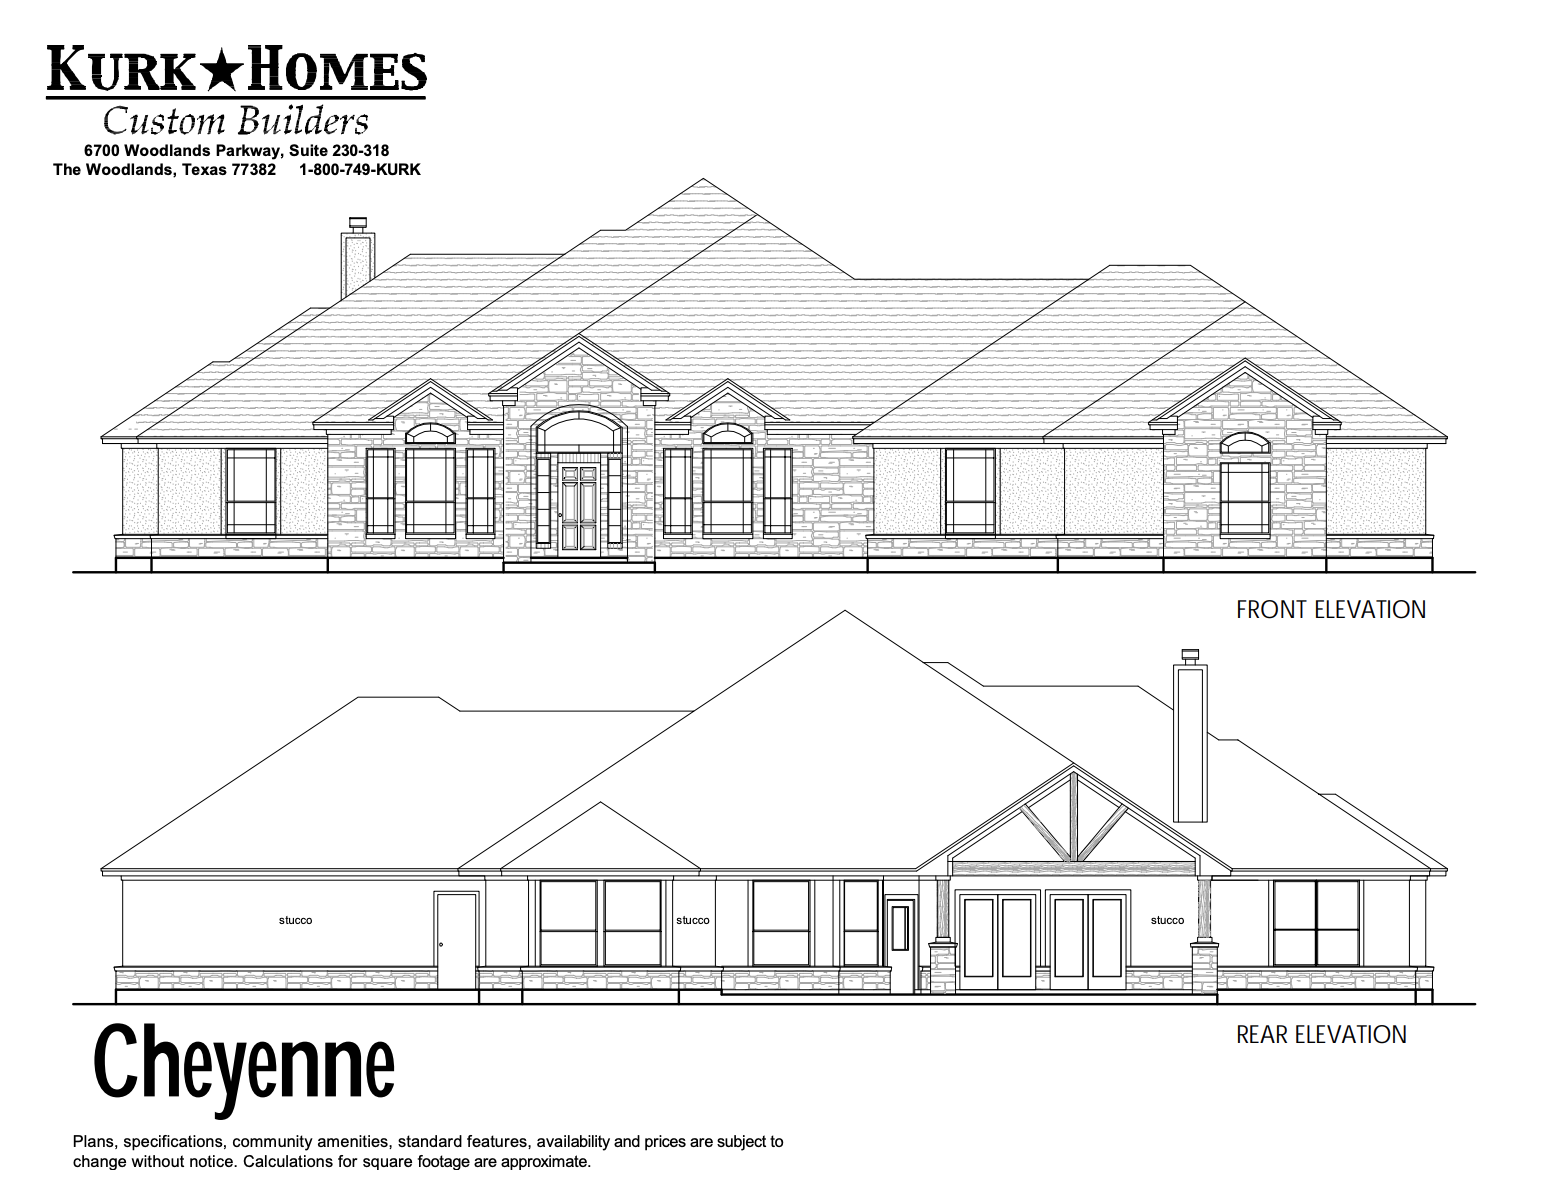 The Cheyenne - Front Elevation